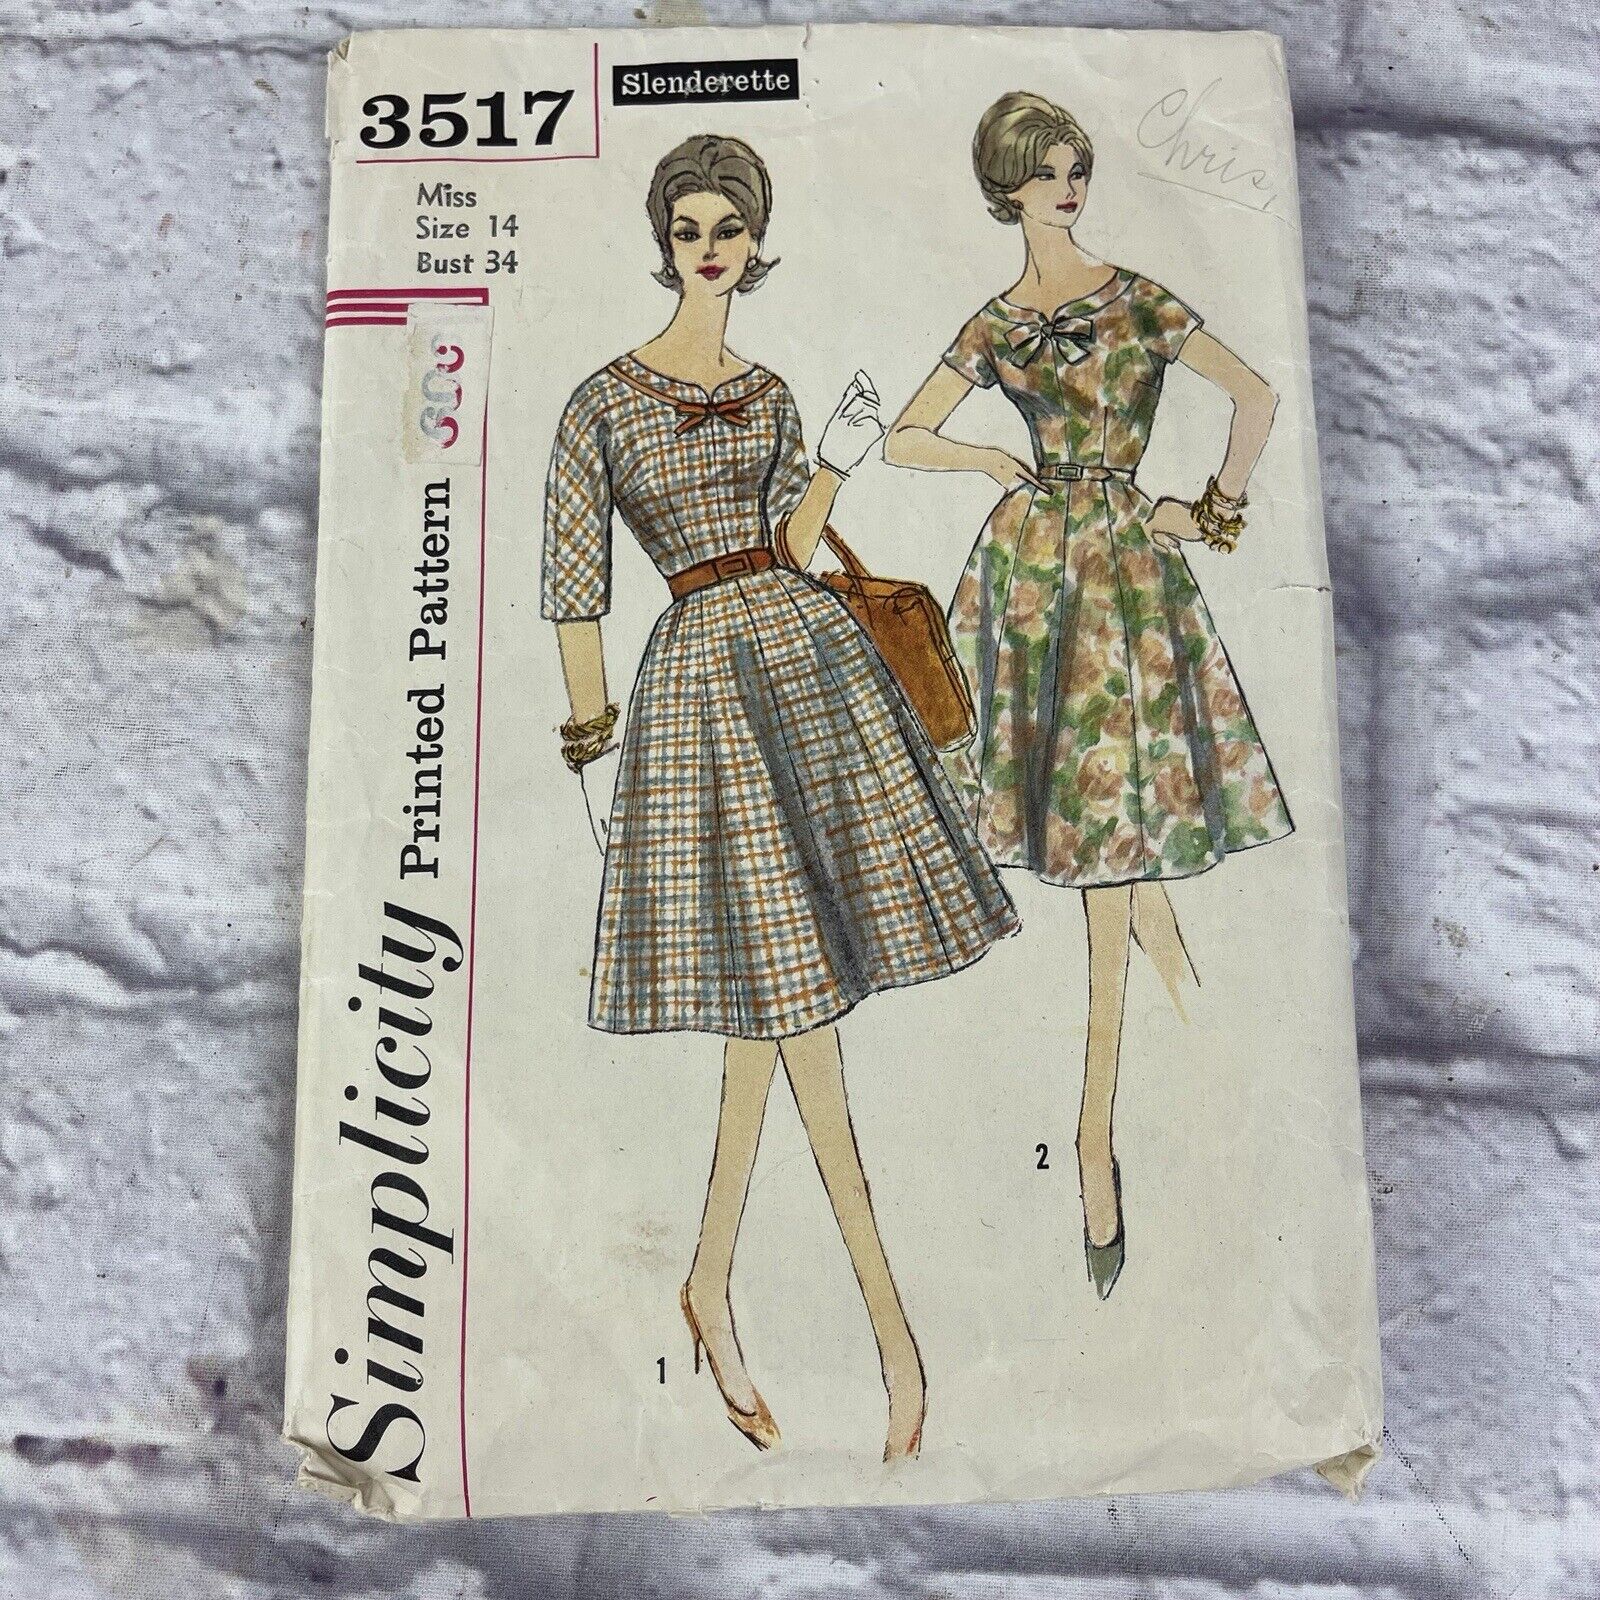 Vintage Simplicity #3517 Pattern For Misses Size 14 One-Piece Dress